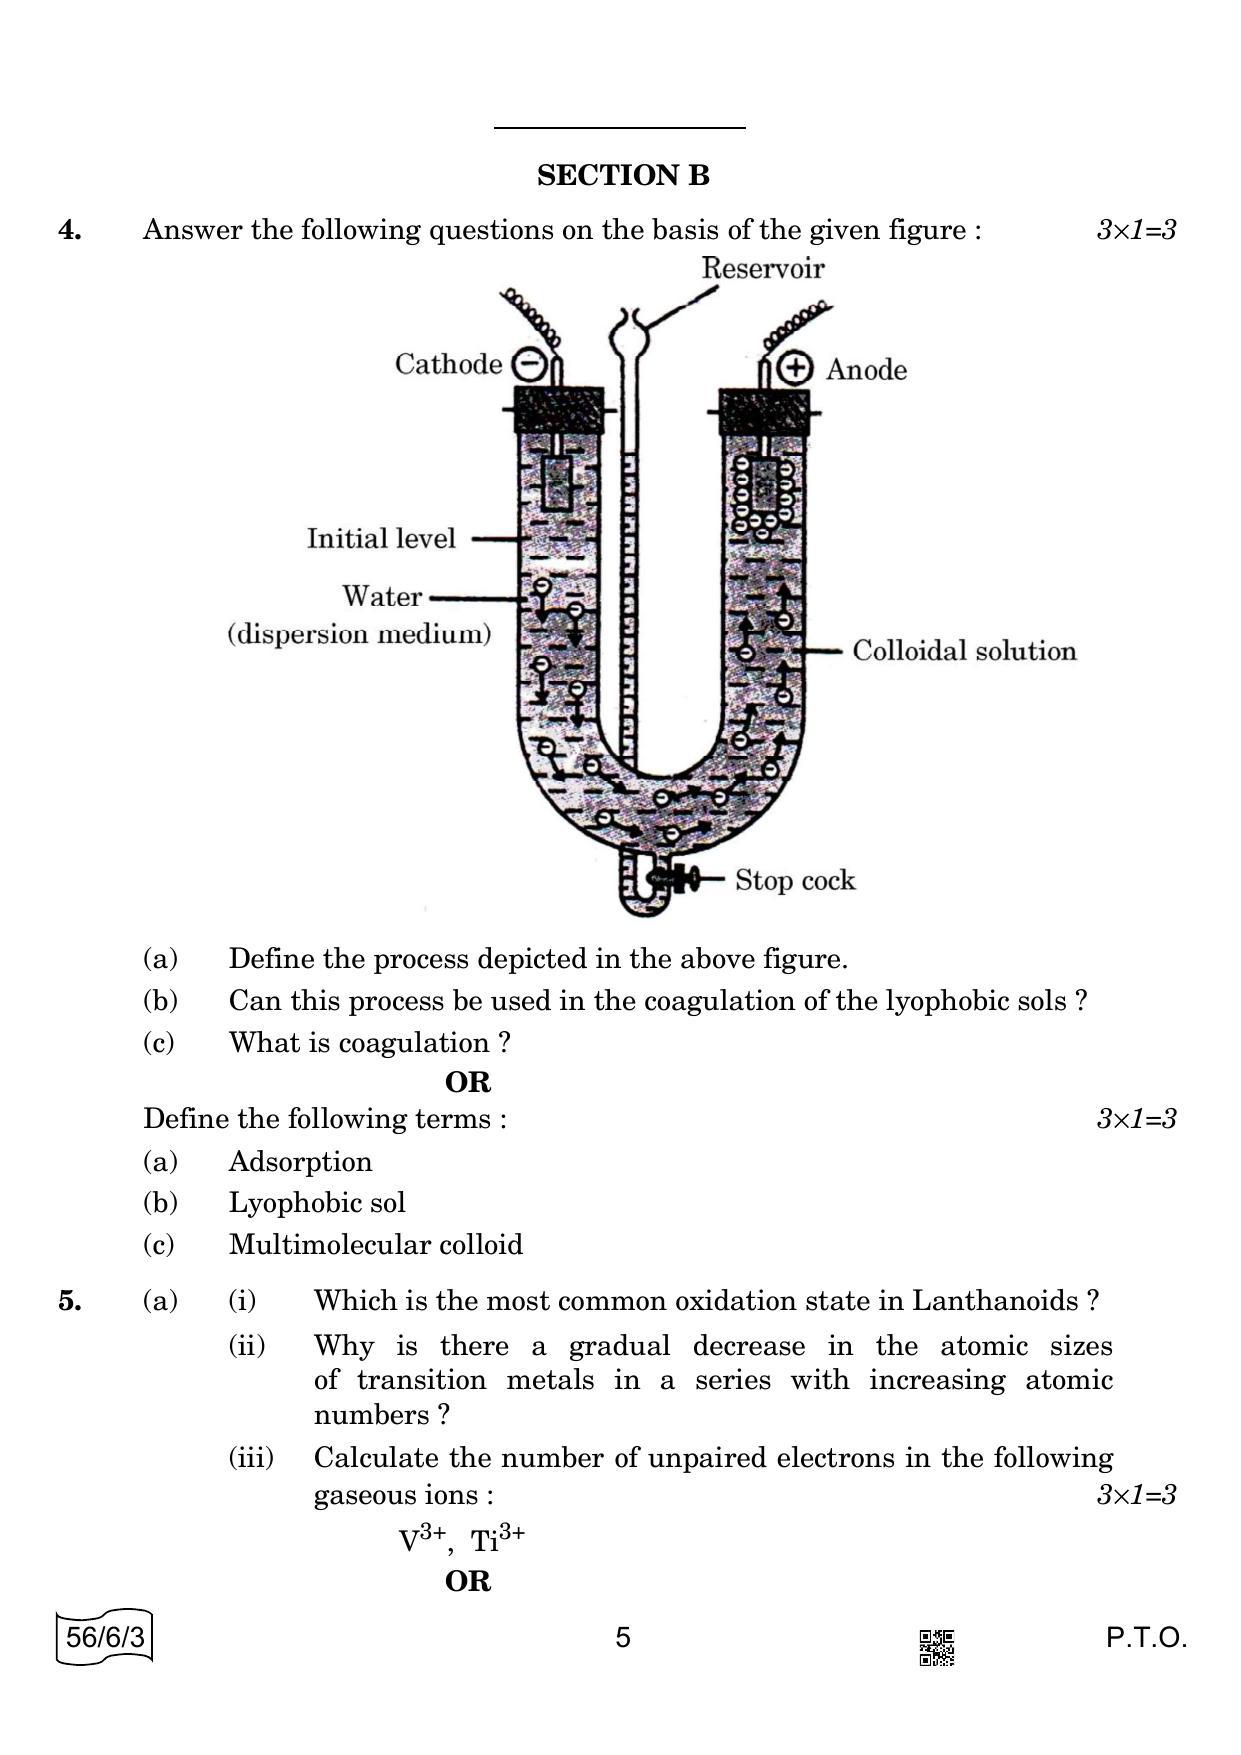 CBSE Class 12 56-6-3 CHEMISTRY 2022 Compartment Question Paper - Page 5